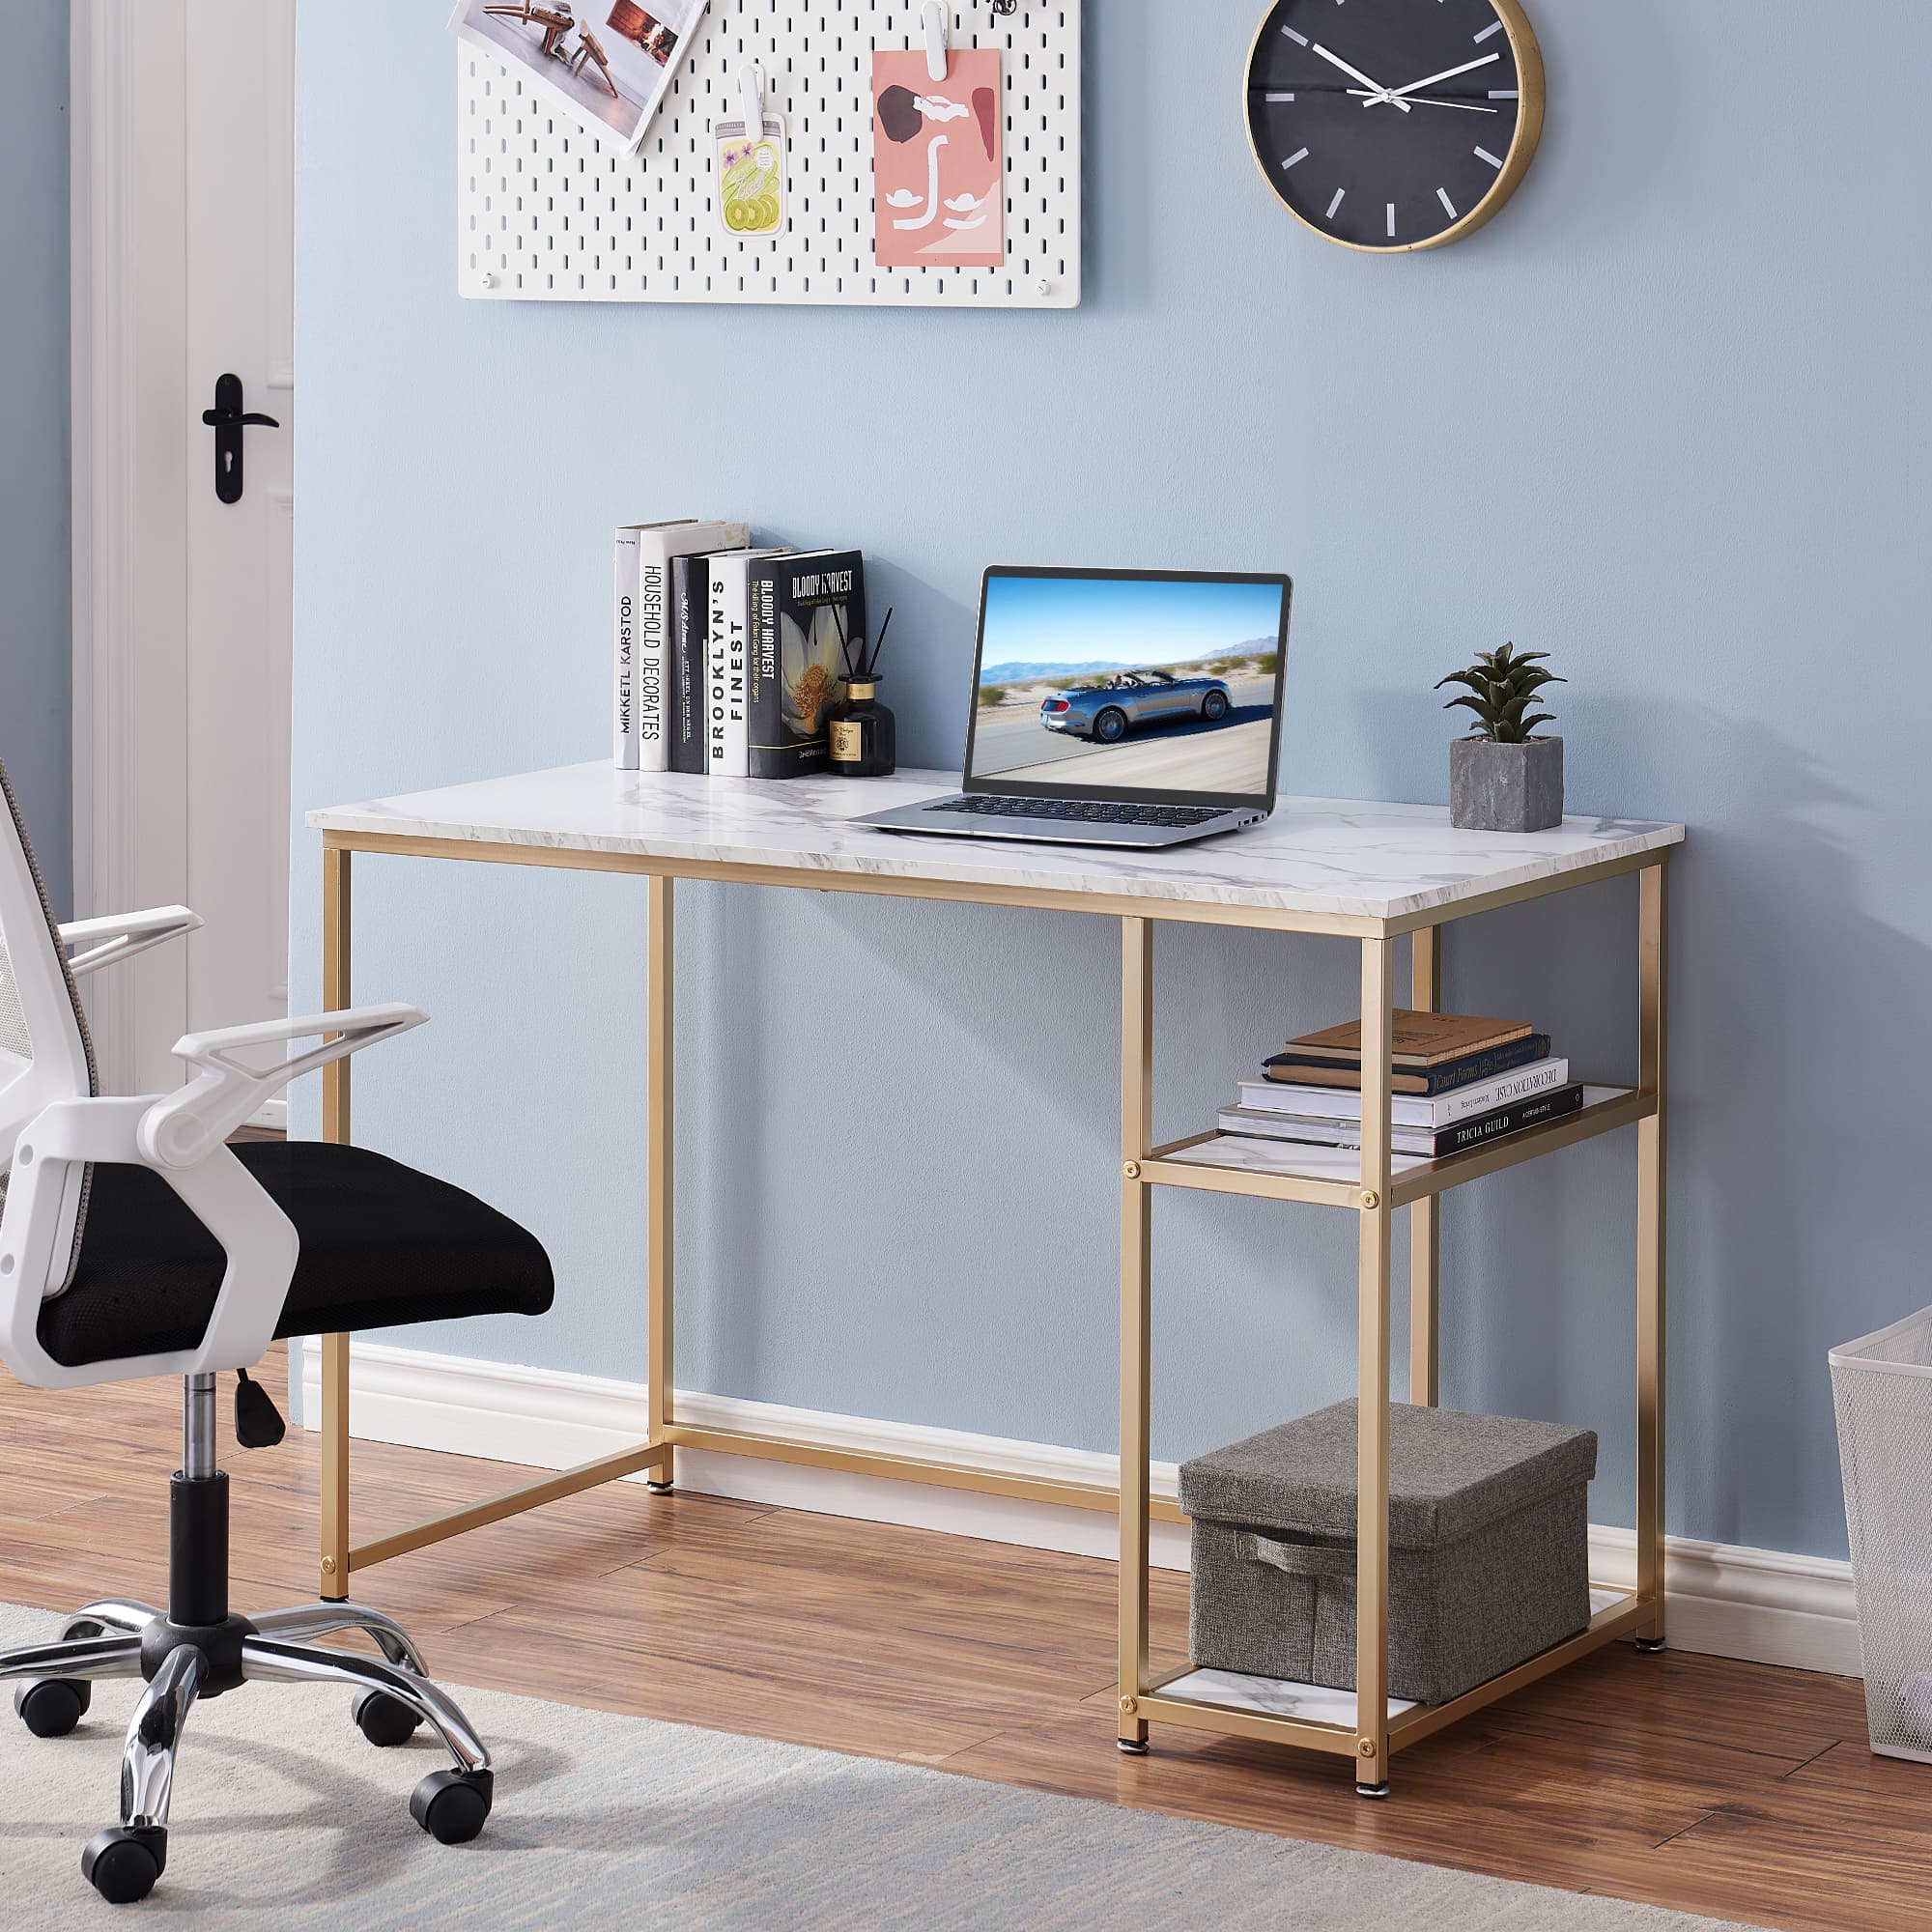 Ivinta Computer Desk with Drawers, 52 Inches Office Desk with Hutch and Printer Shelf, Modern Writing Desk - Brown